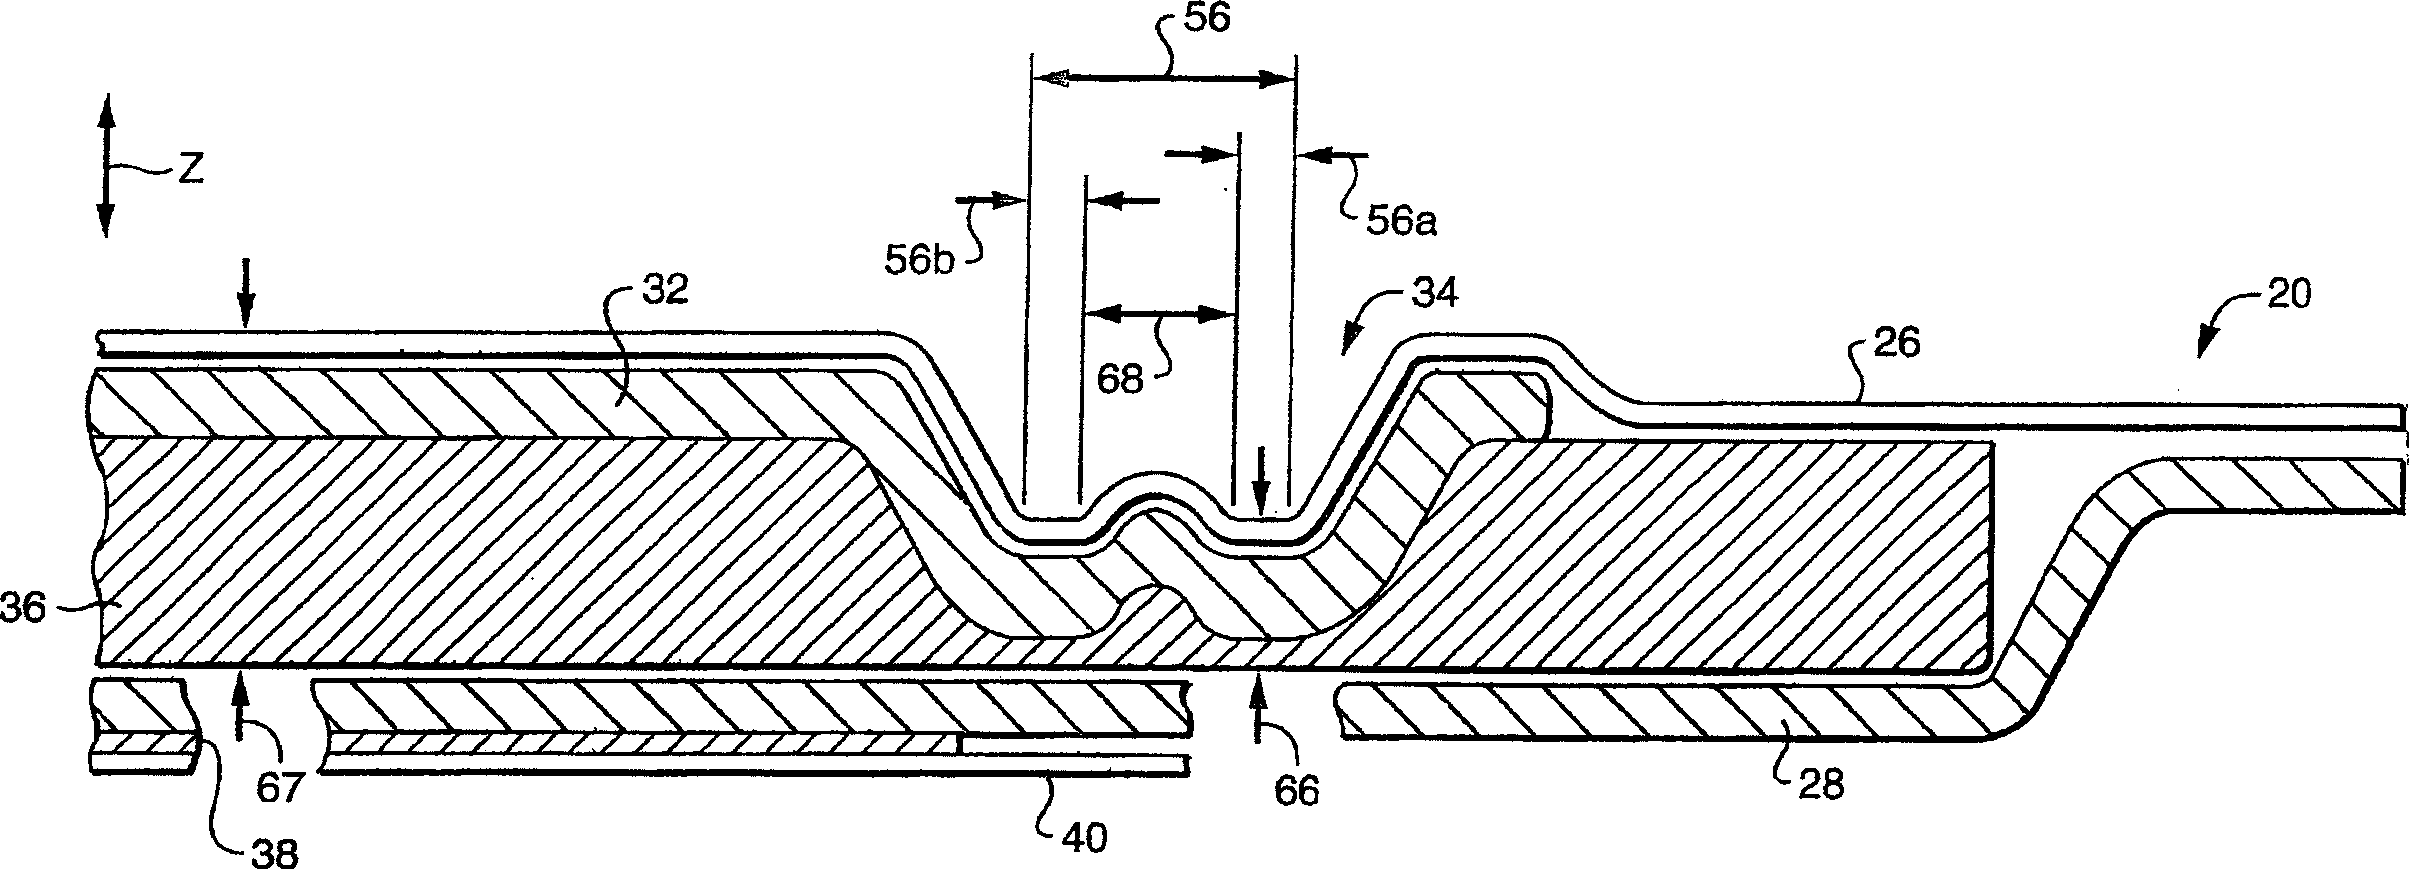 An absorbent article with an embossment along the perimeter